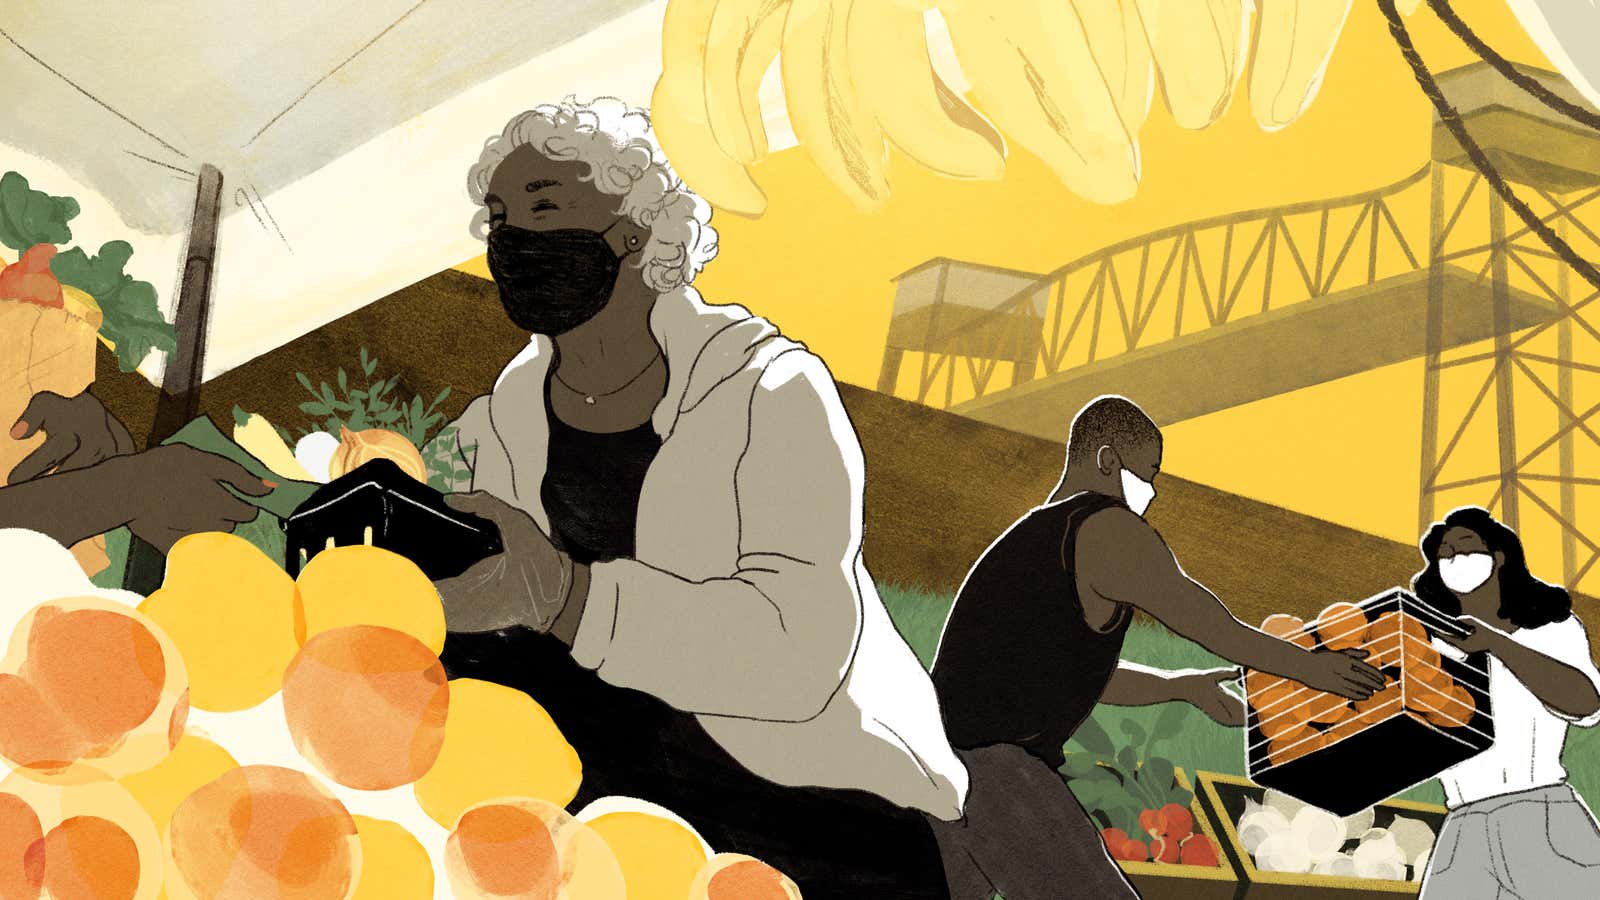 An illustration shows Lower Ninth Ward residents with fresh produce in front of the levee that failed and flooded the neighborhood during Hurricane Katrina.